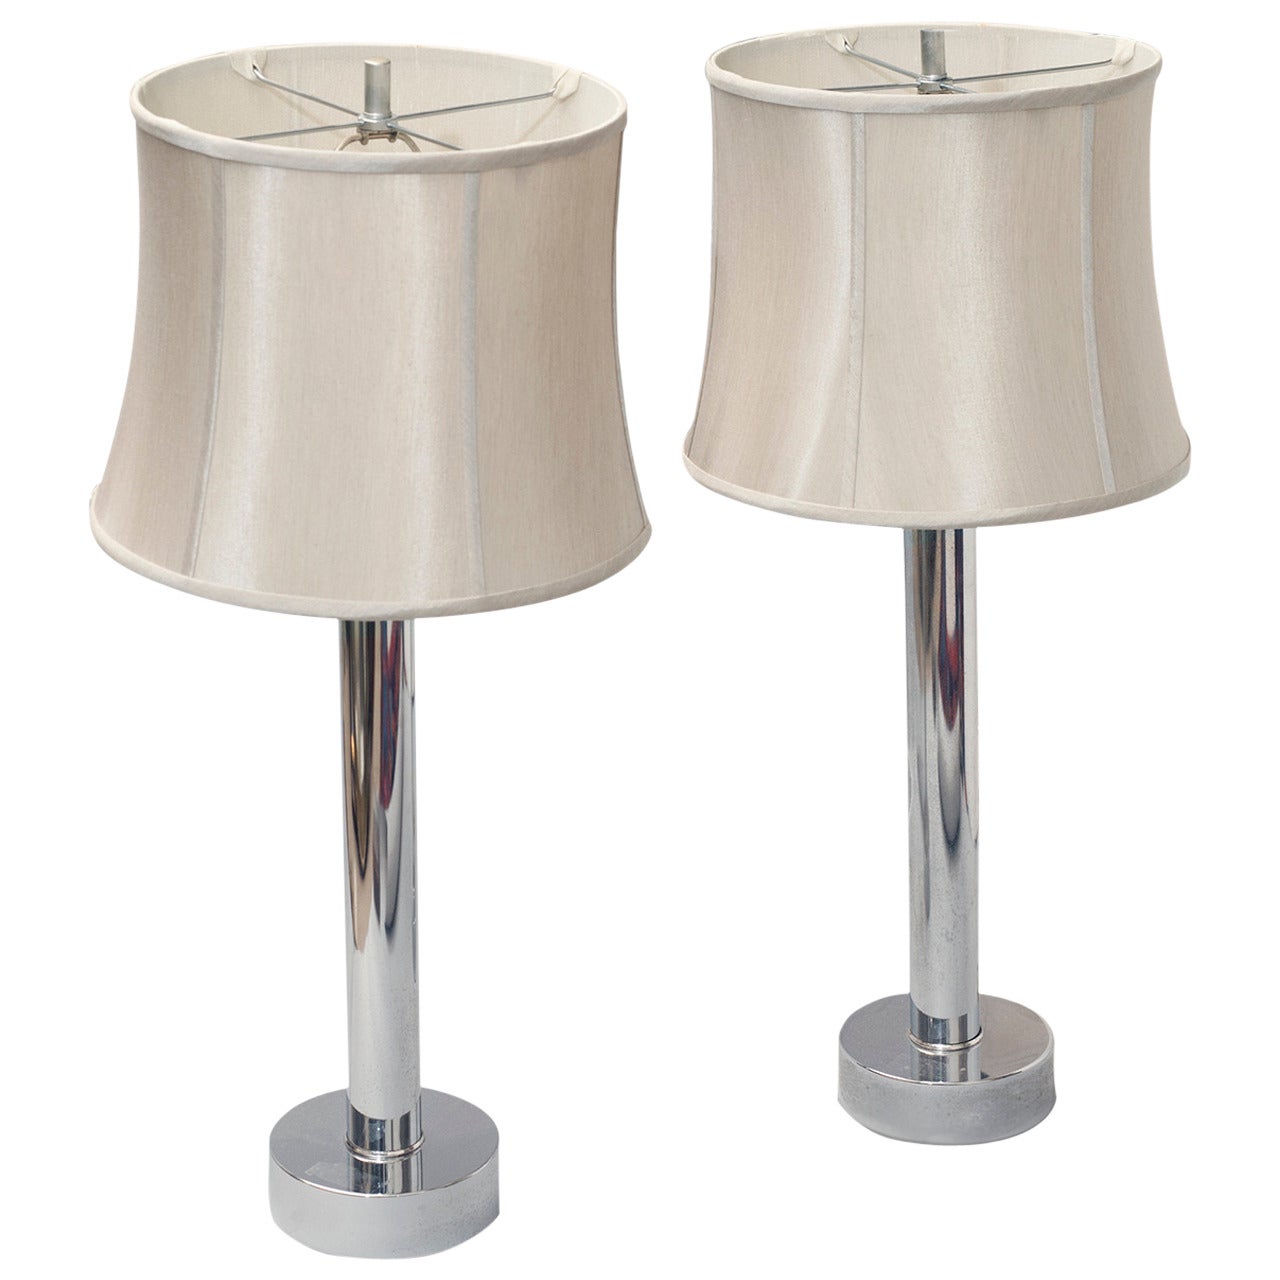 Pair of Mid-Century Modern Chrome Table Lamps For Sale